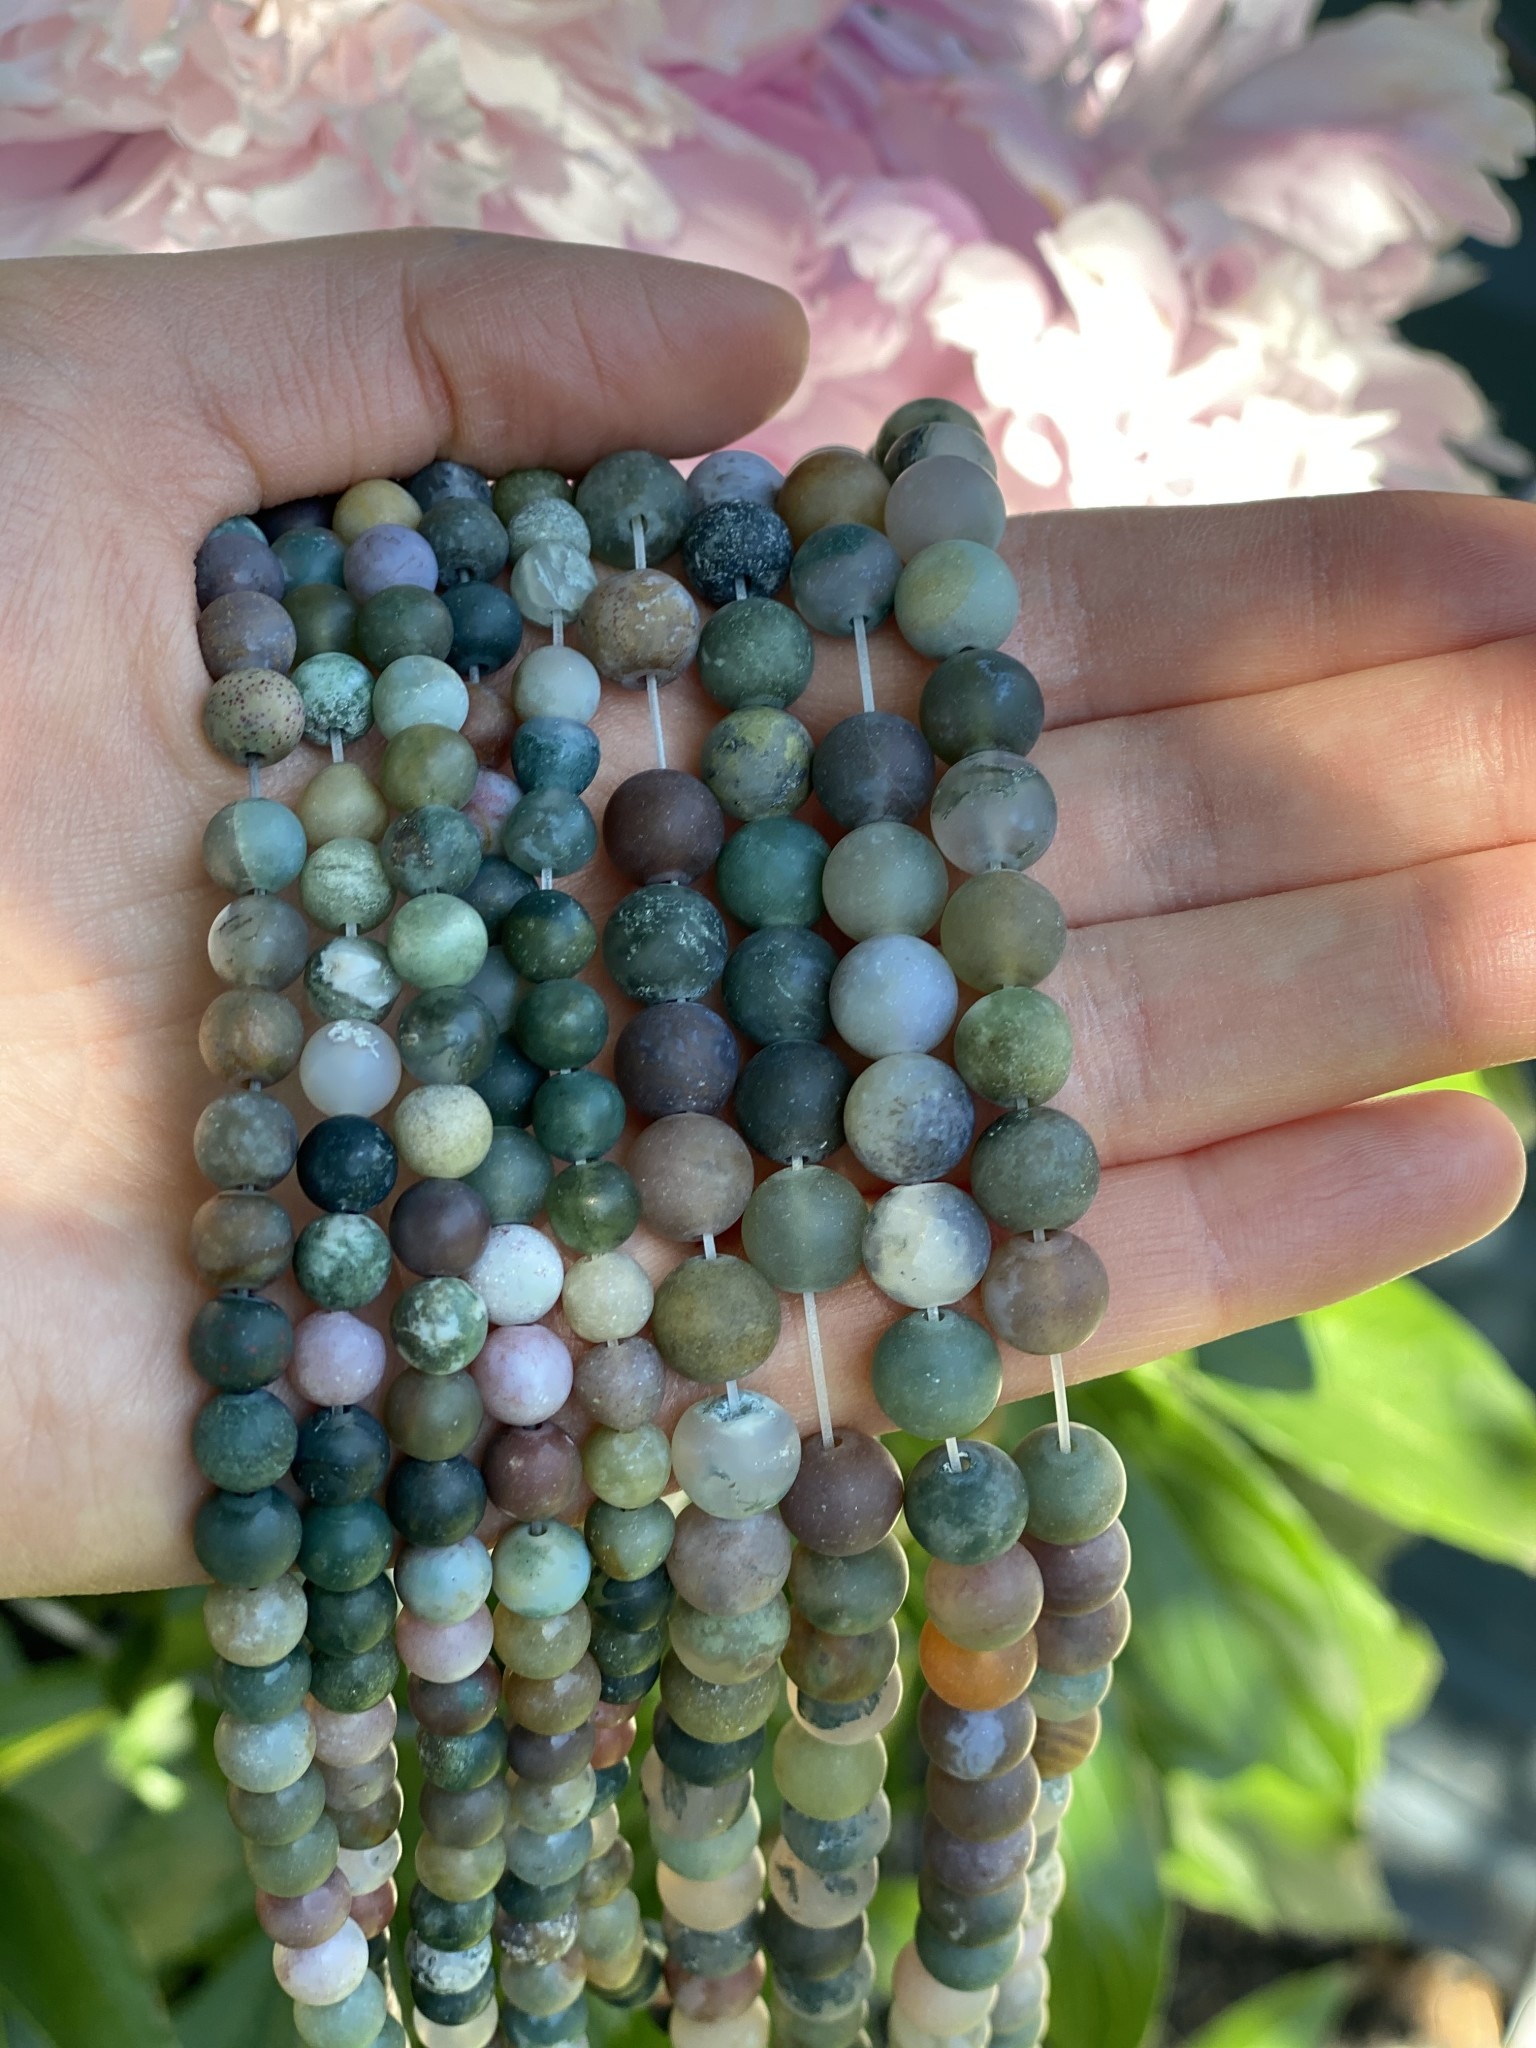 Indian Agate – P.S. Beads